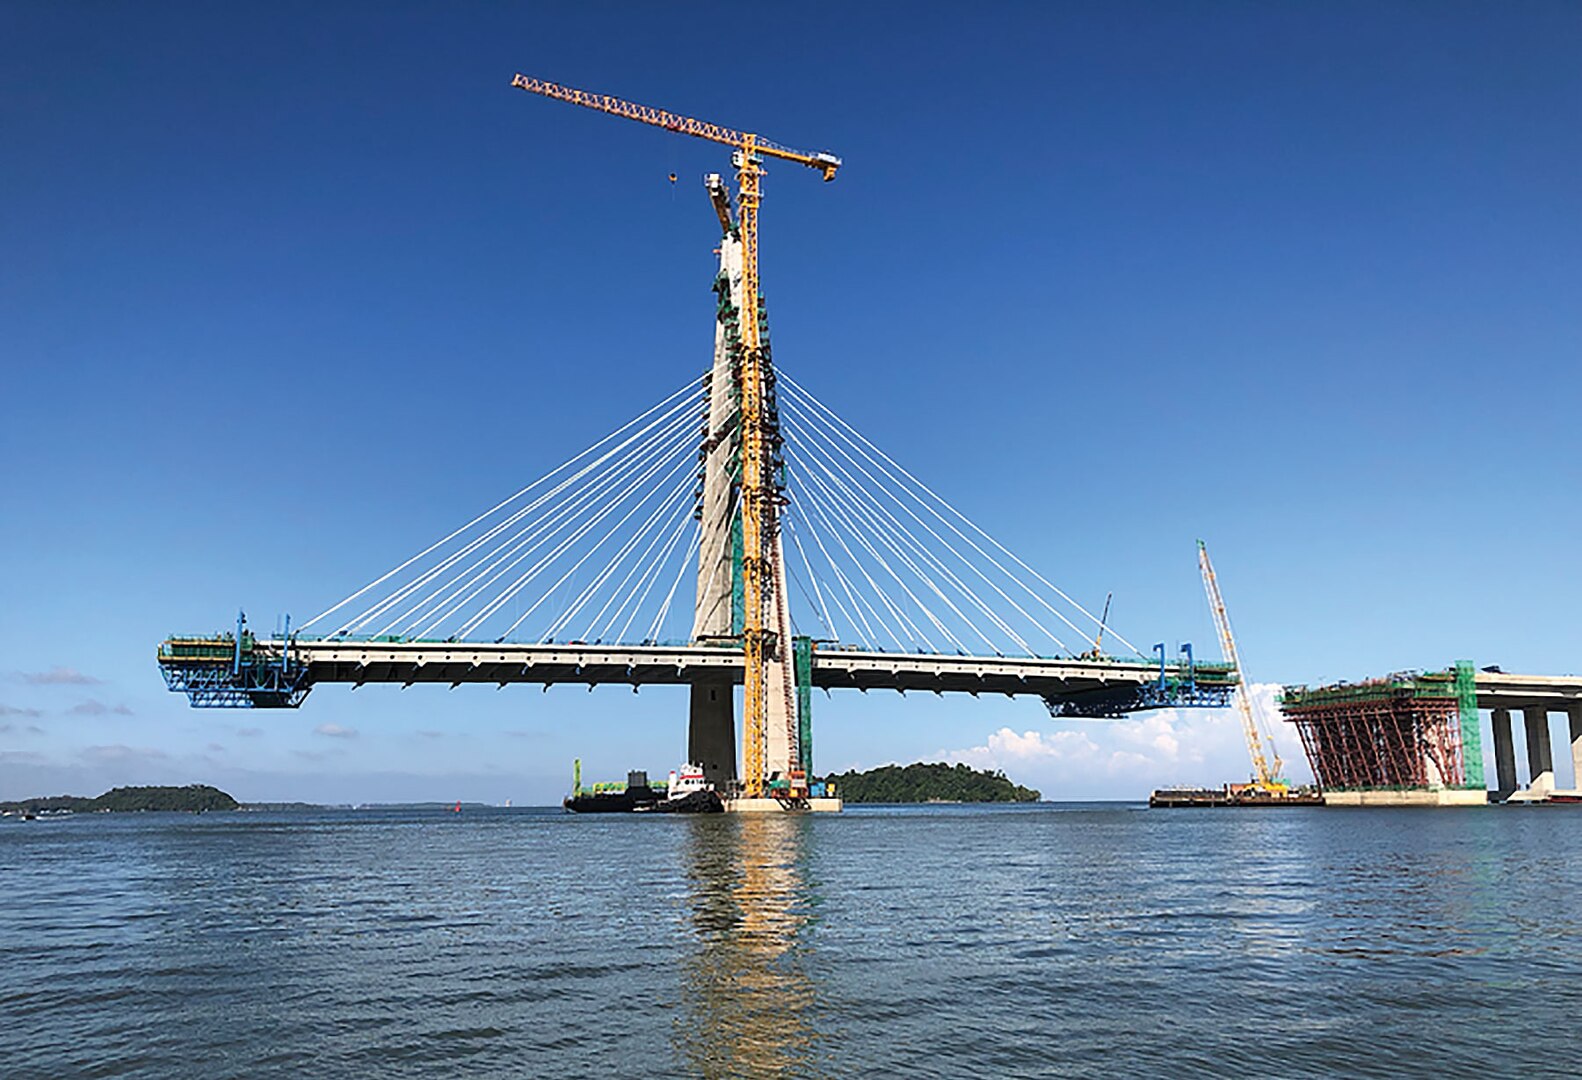 Part of China’s Belt and Road Initiative, the partially completed bridge at the Kota Batu end of the Temburong Bridge construction project in Brunei. (Peter L. Higgs)